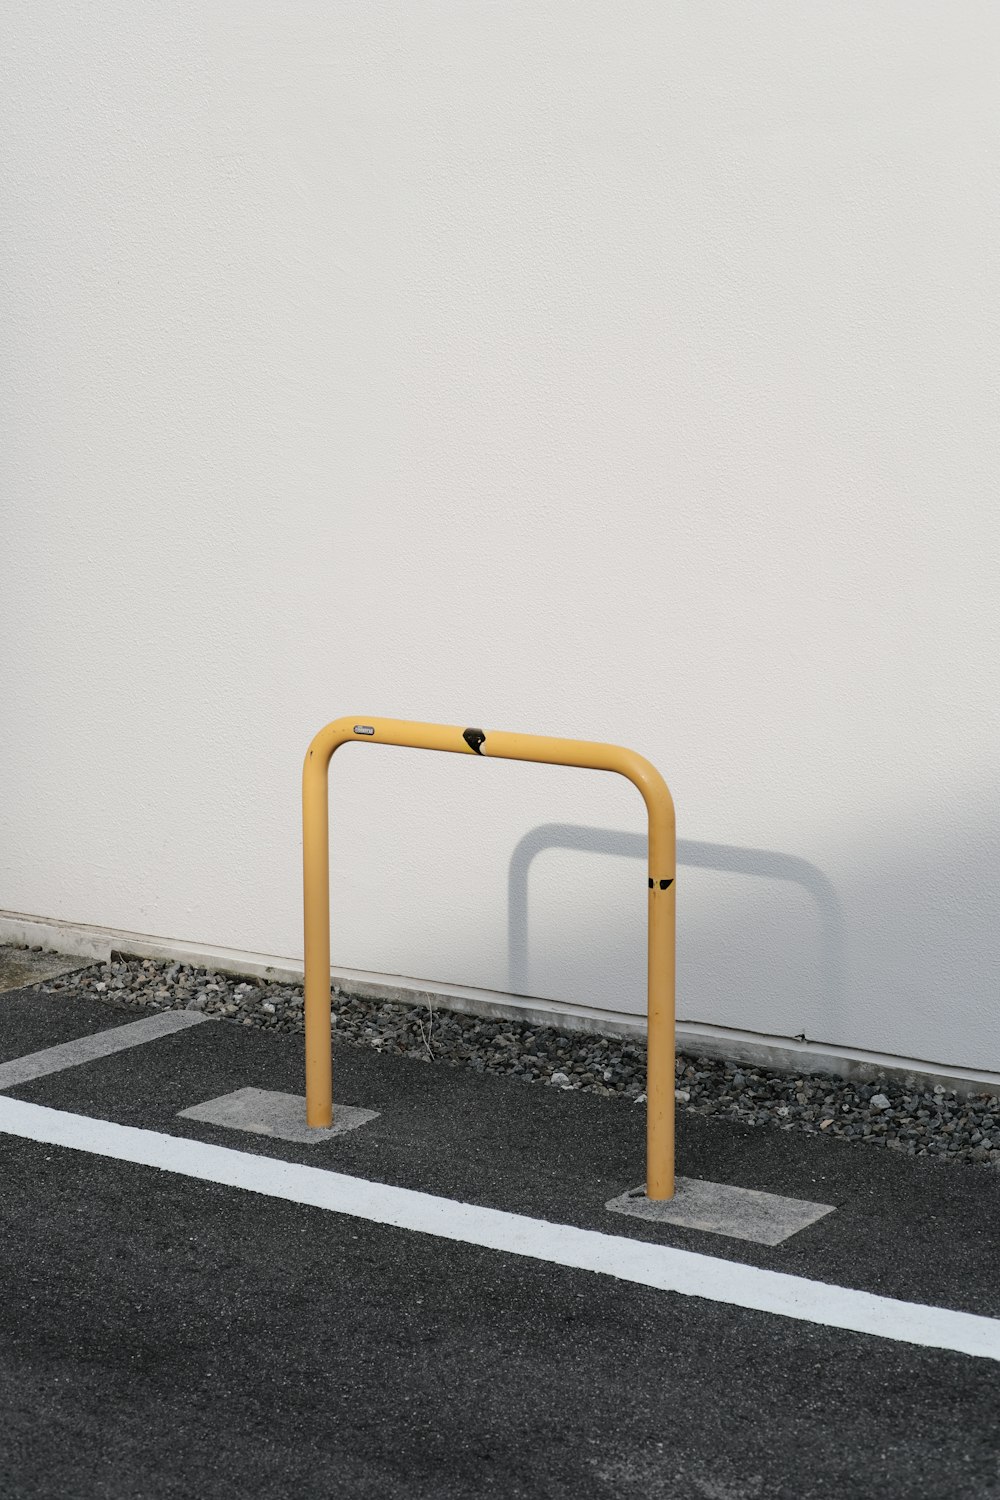 an empty parking space with a yellow gate